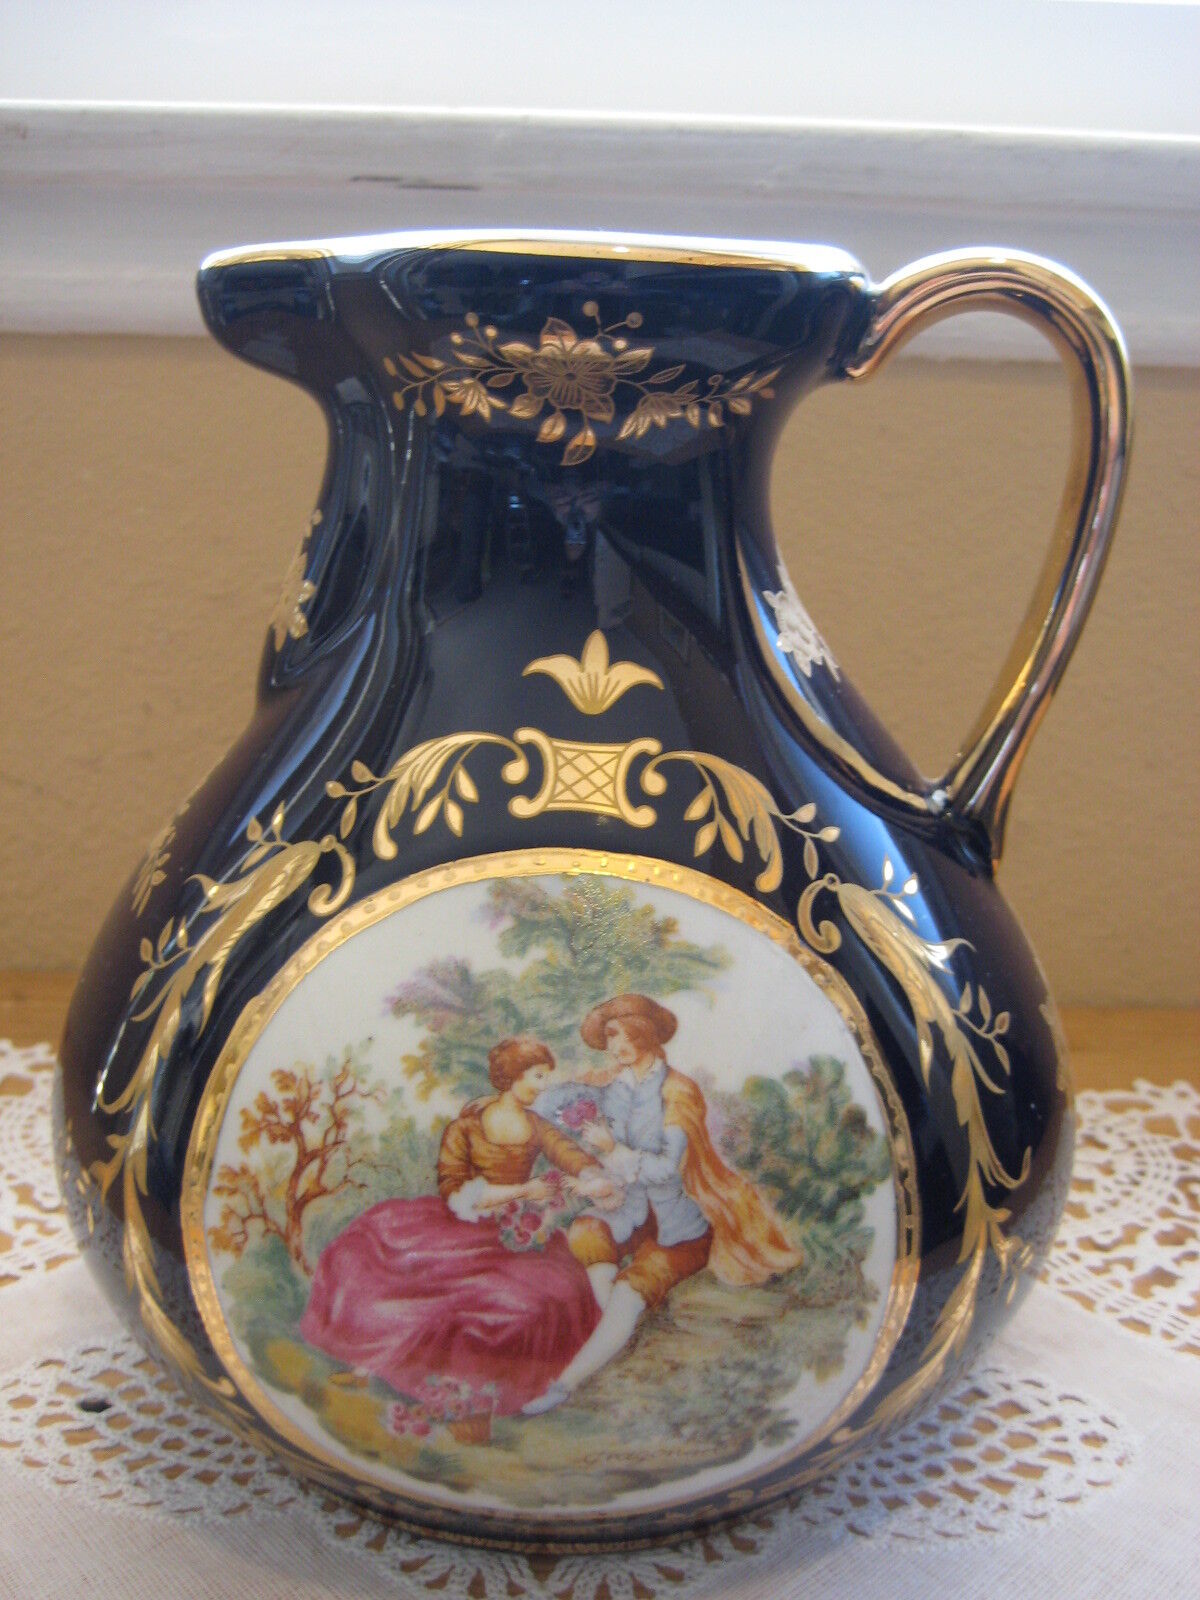 VERY BEAUTIFUL NAVY BLUE/GOLD PORCELAIN PITCHER VASE, MADE IN CHINA